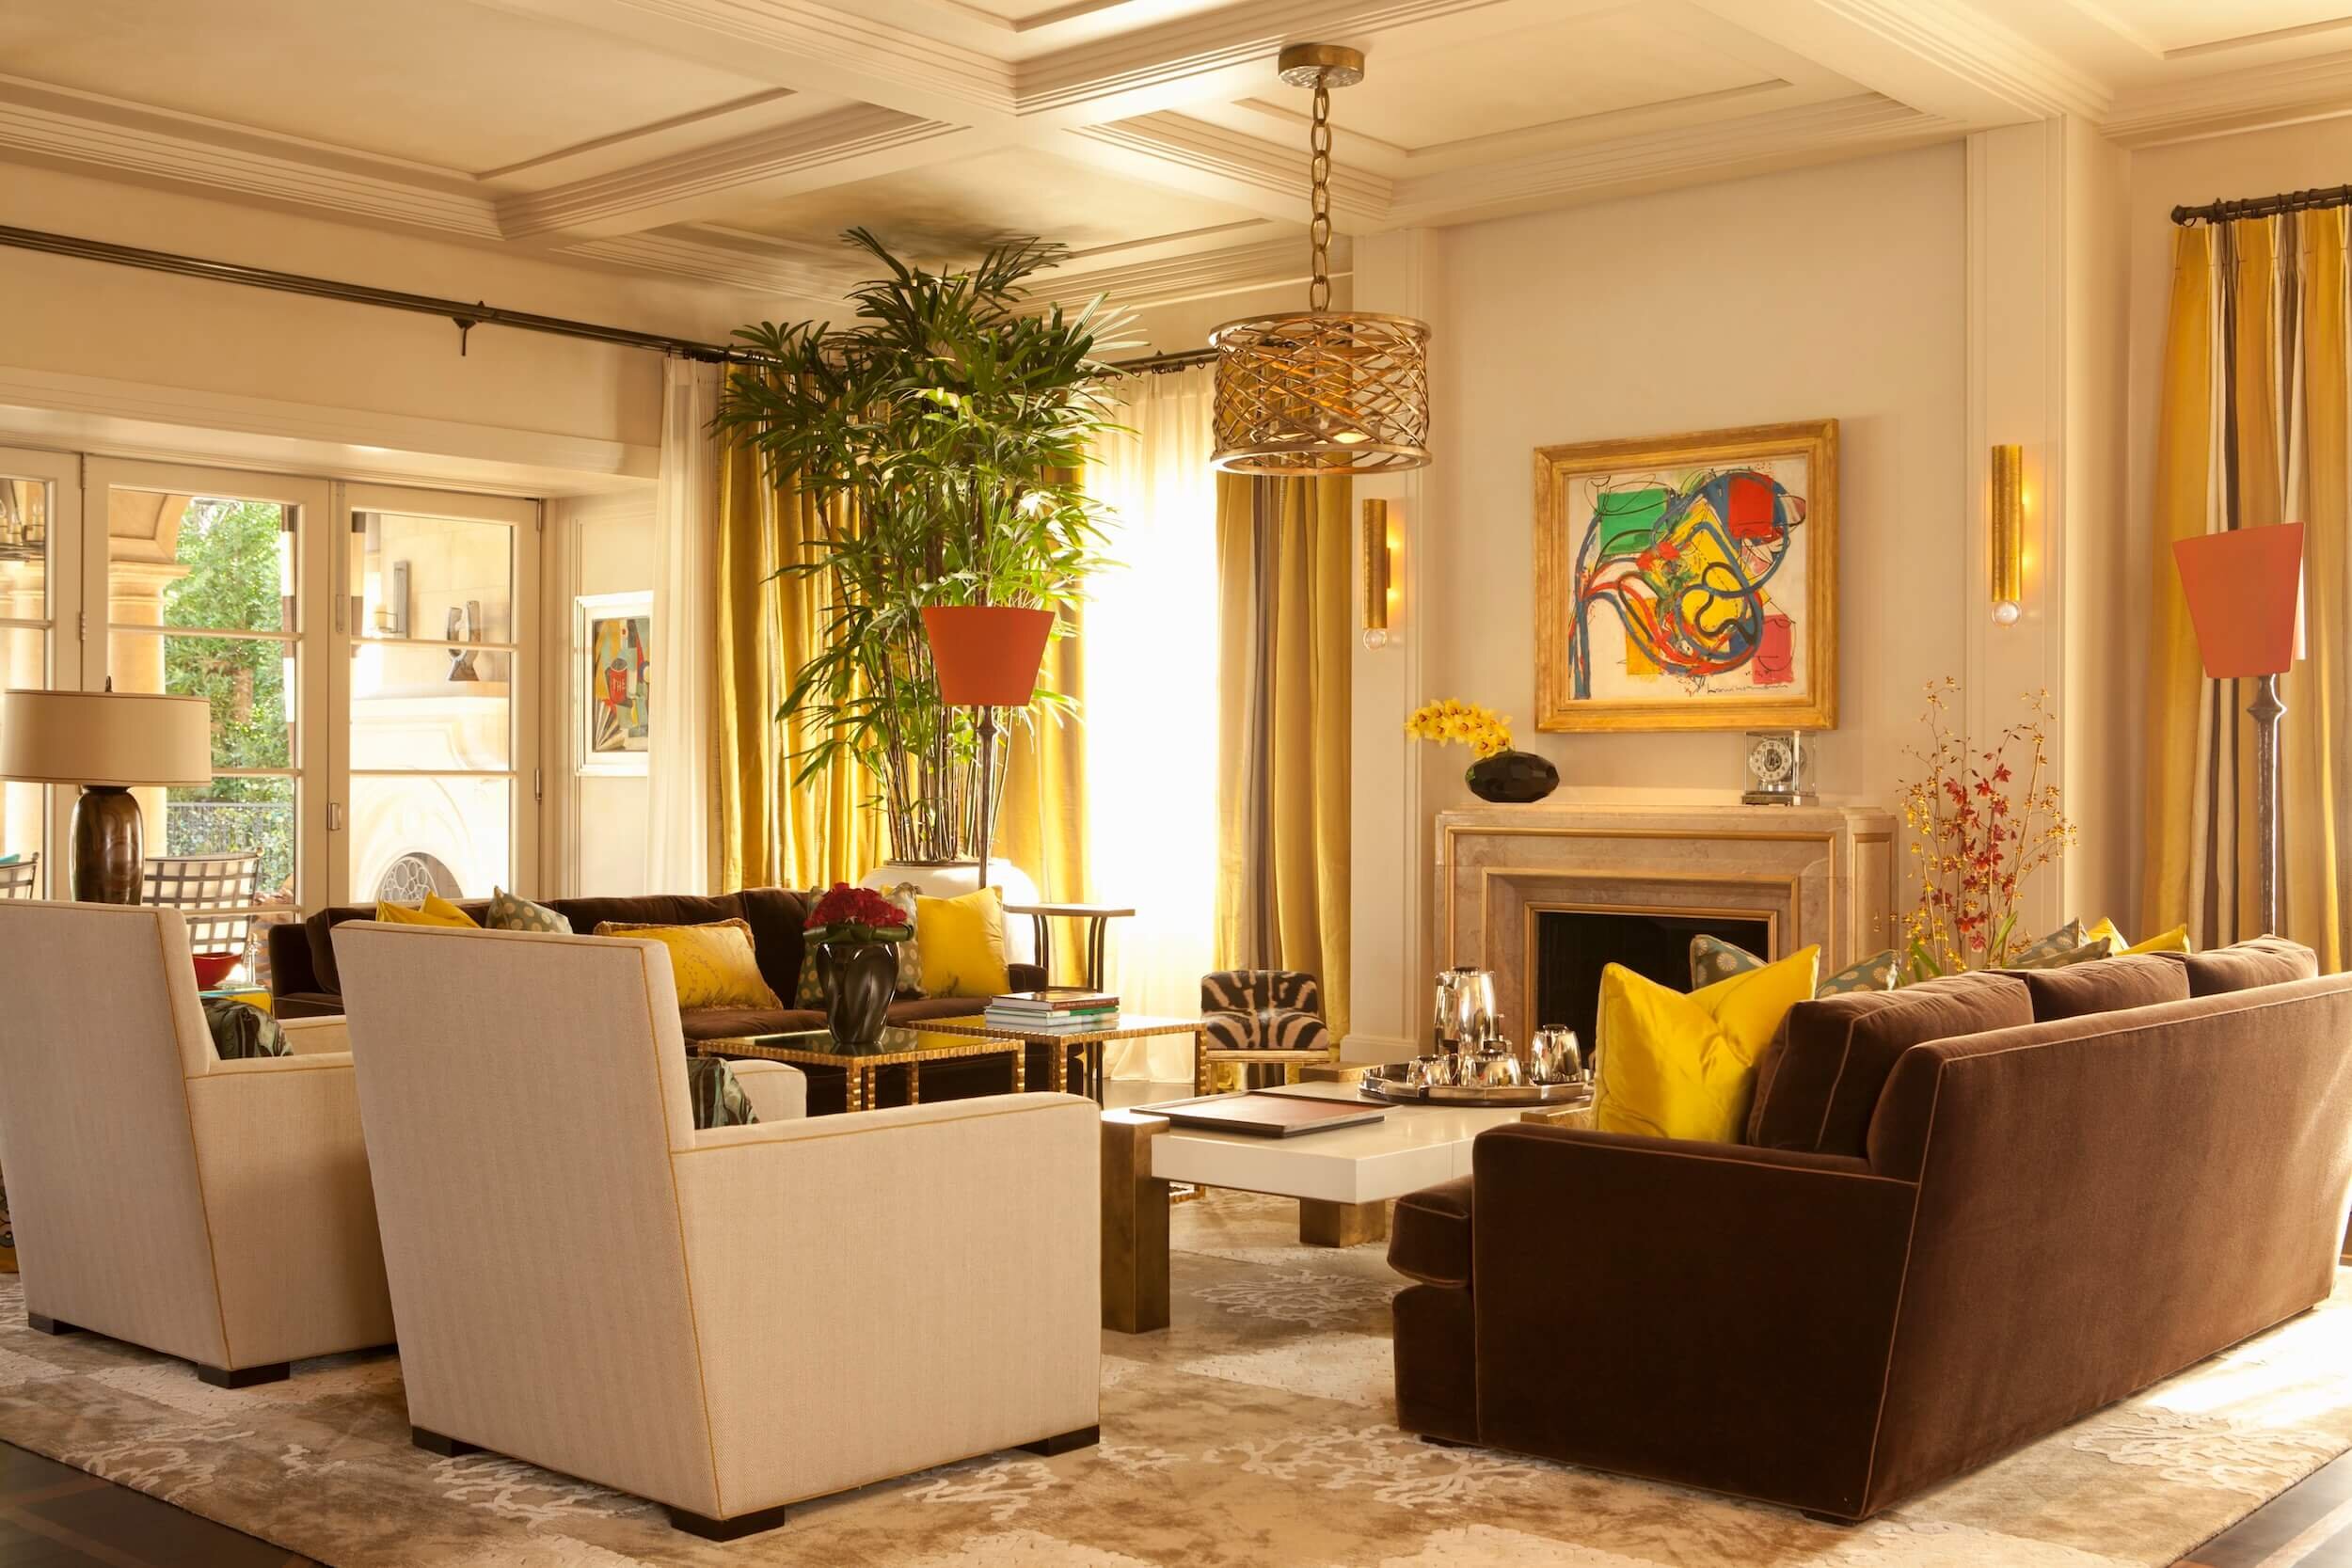 A Living Room with contemporary furnishing, tai Pin rug, Custom Drapery, and Herve van Der straiten pendant lamps